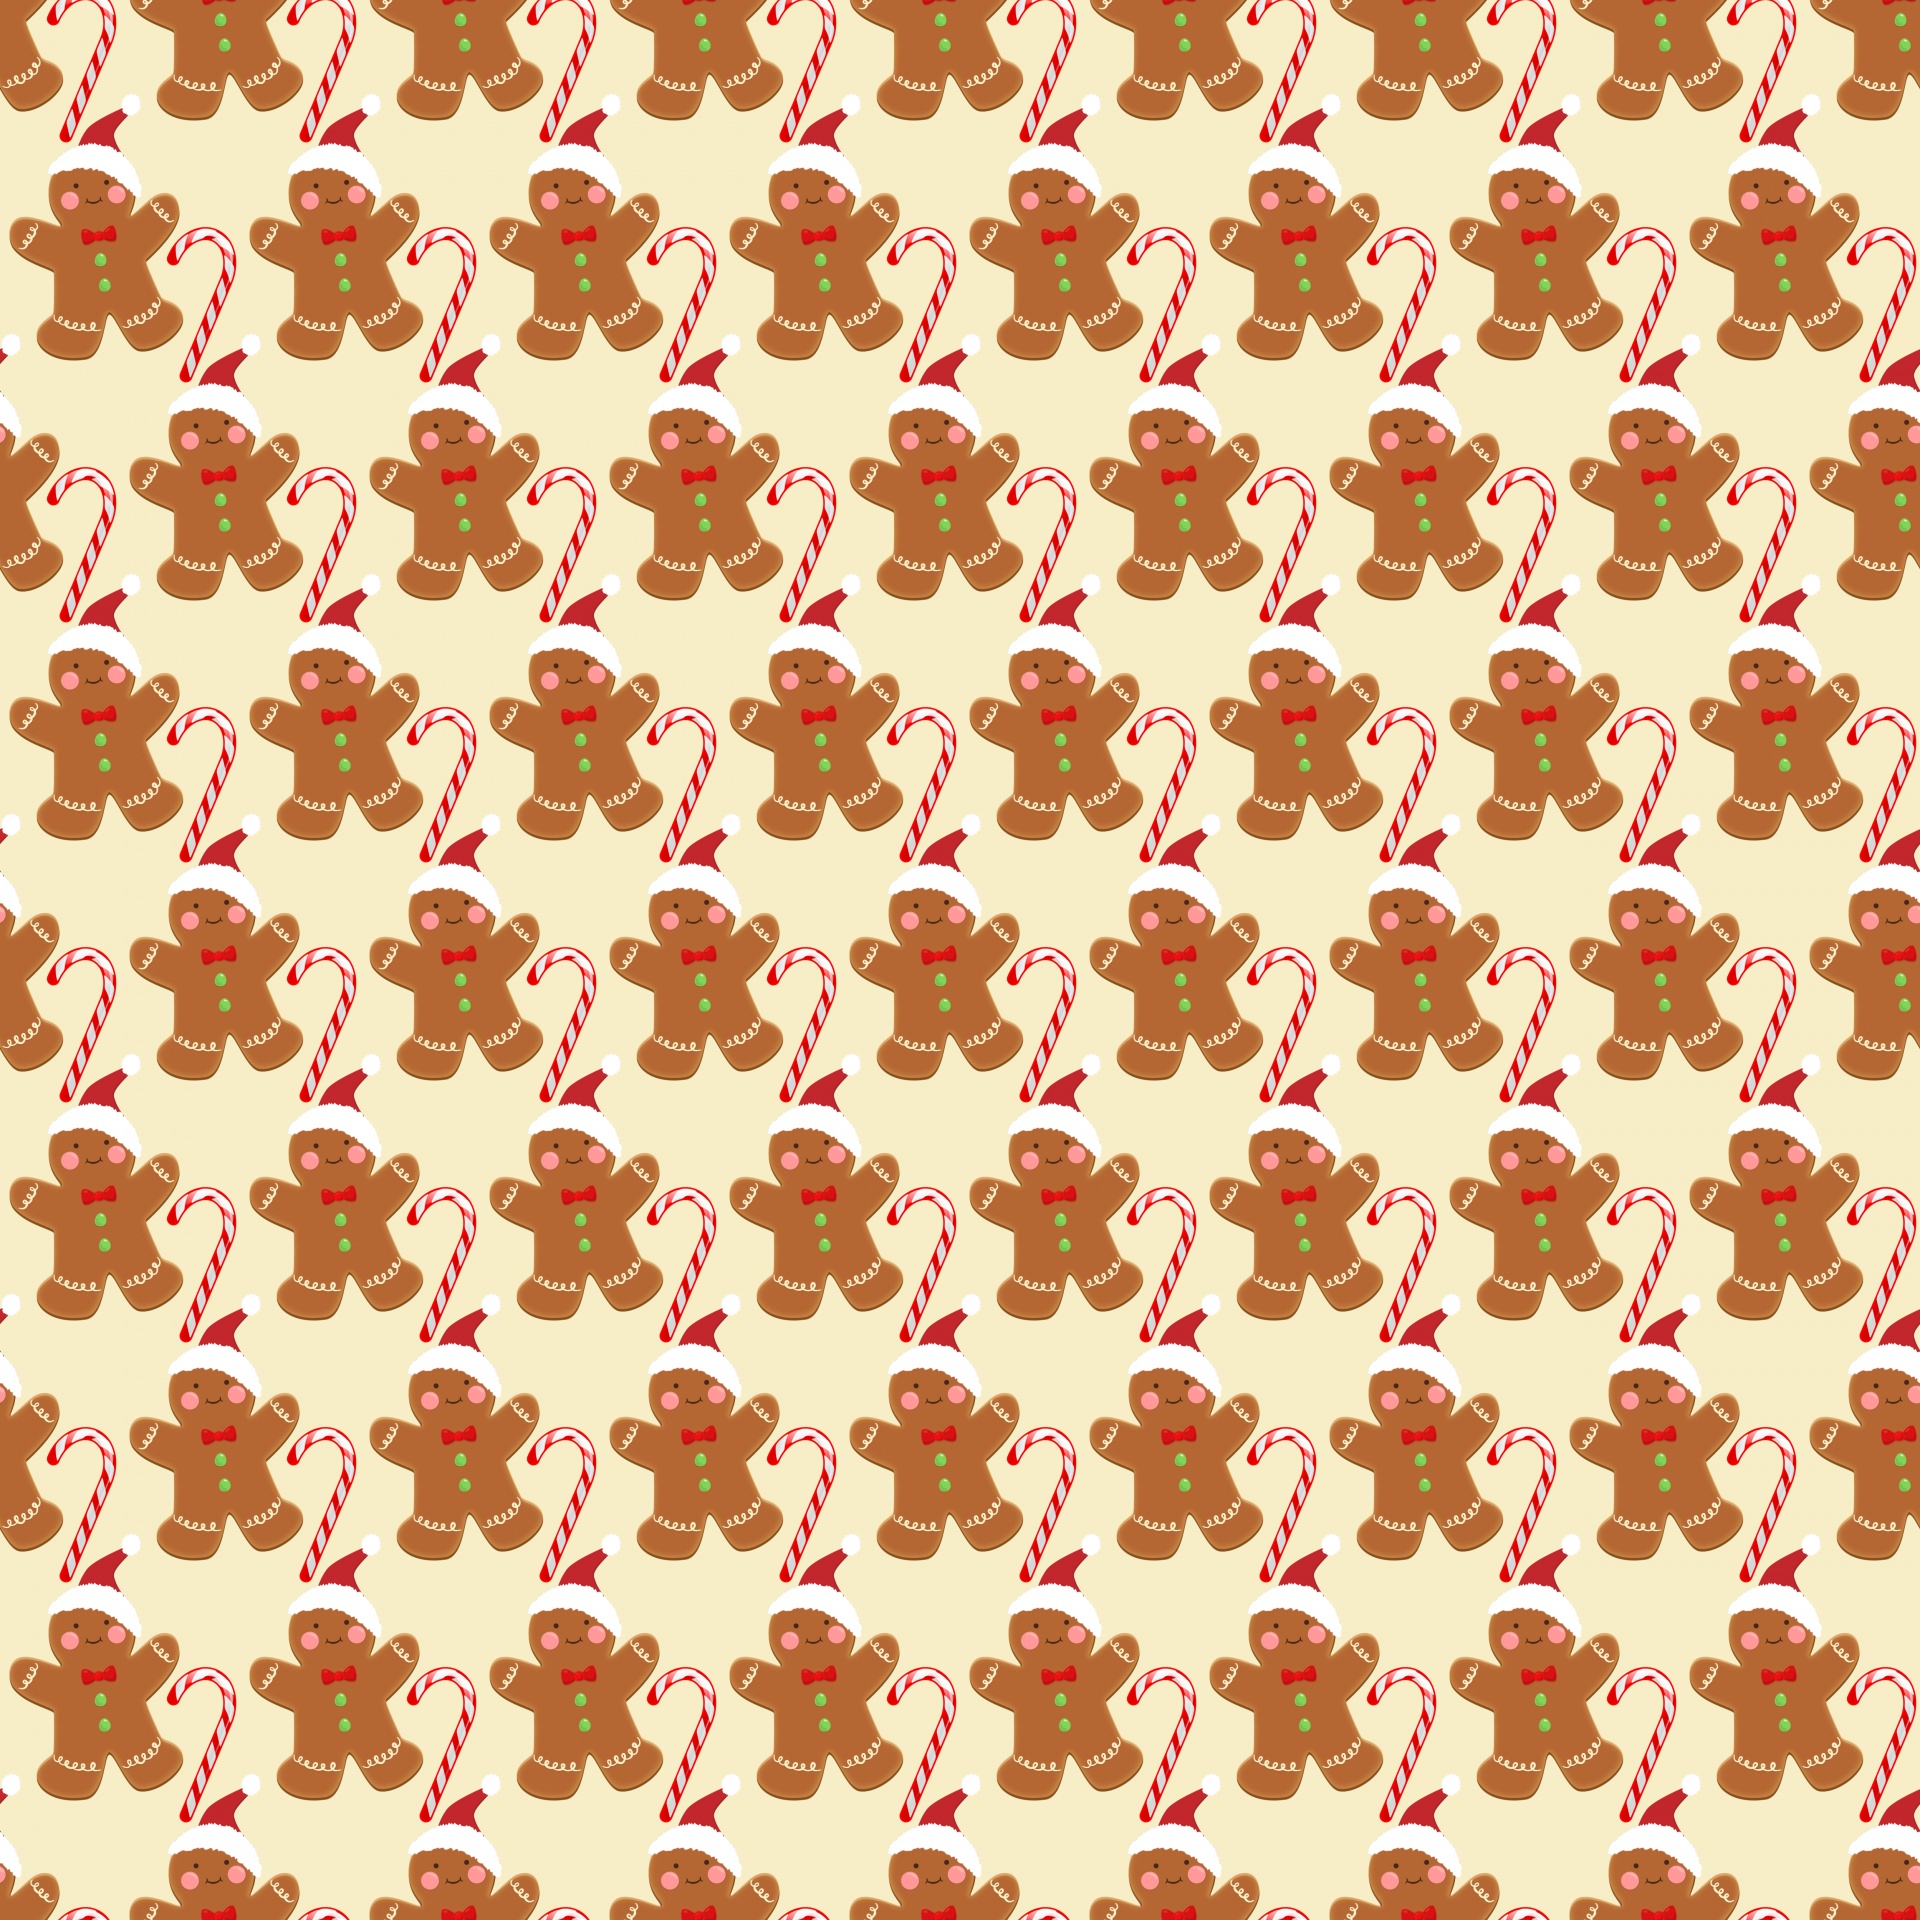 Gingerbread men with candy cane seamless wallpaper pattern background for Christmas